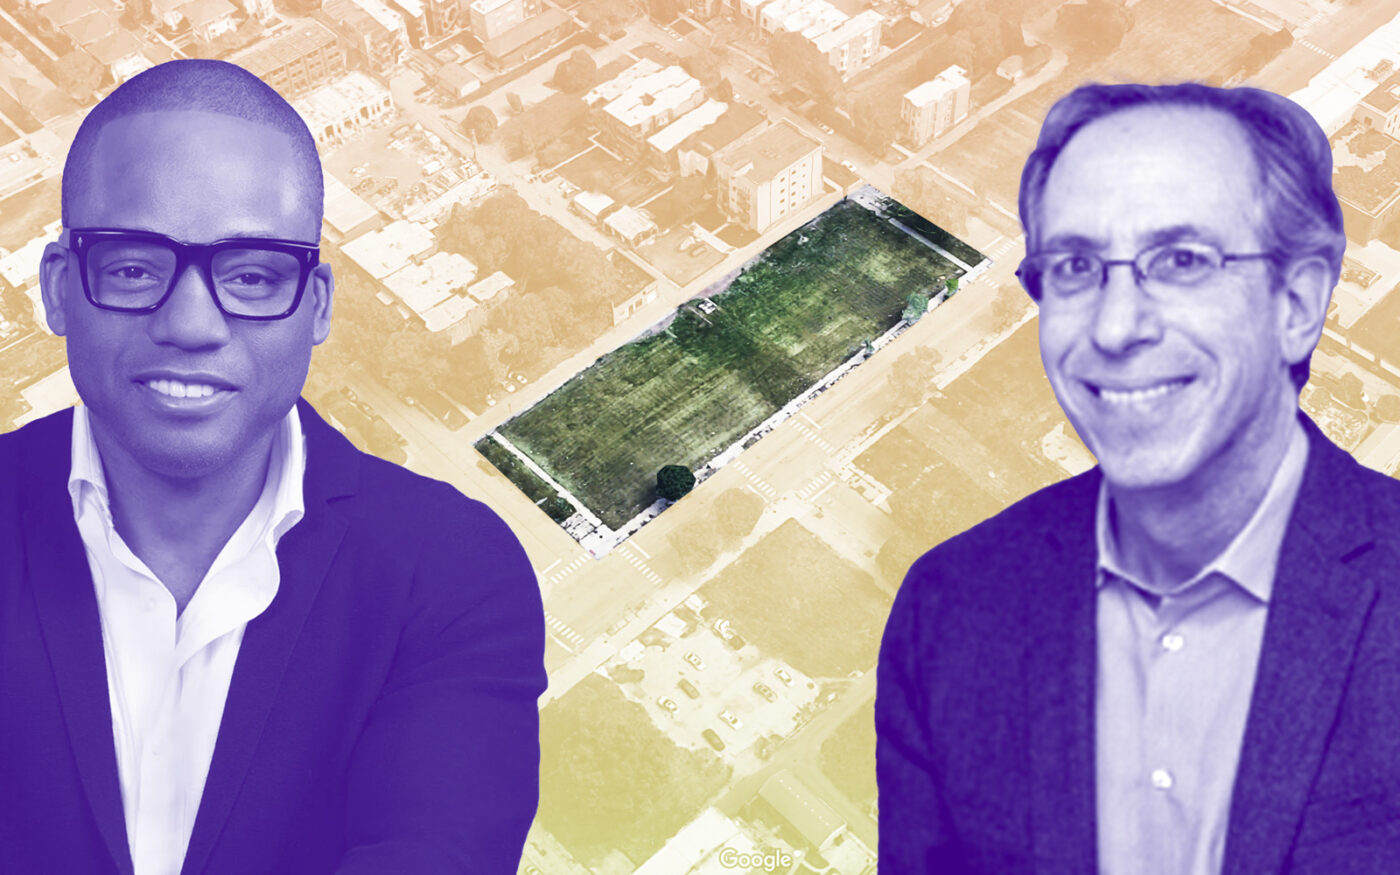 KMW founder Bill Williams and POAH CEO Aaron Gornstein with an aerial of 1000 East 63rd Street